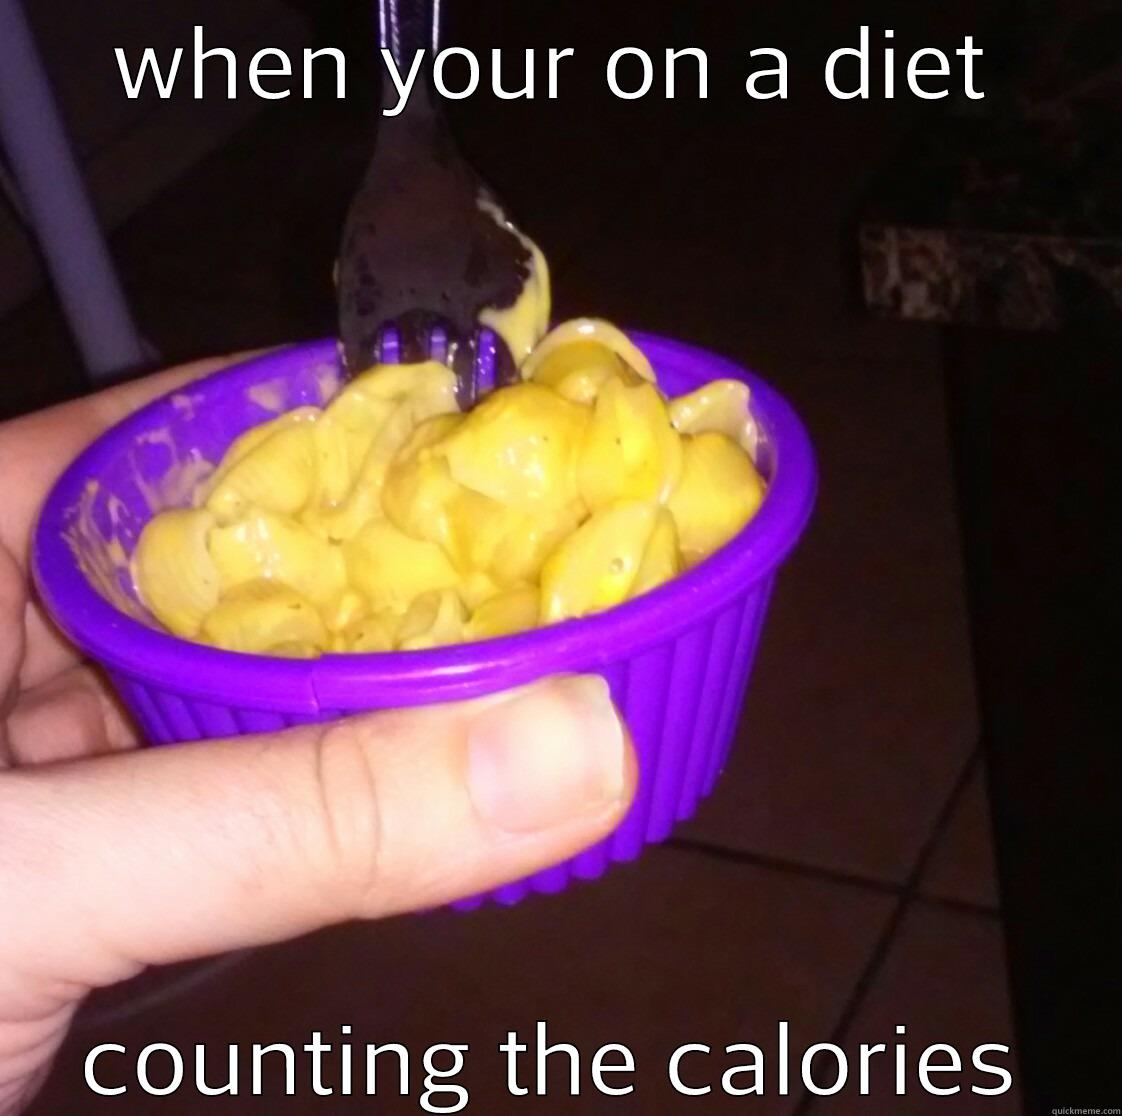 calorie counting - WHEN YOUR ON A DIET COUNTING THE CALORIES Misc